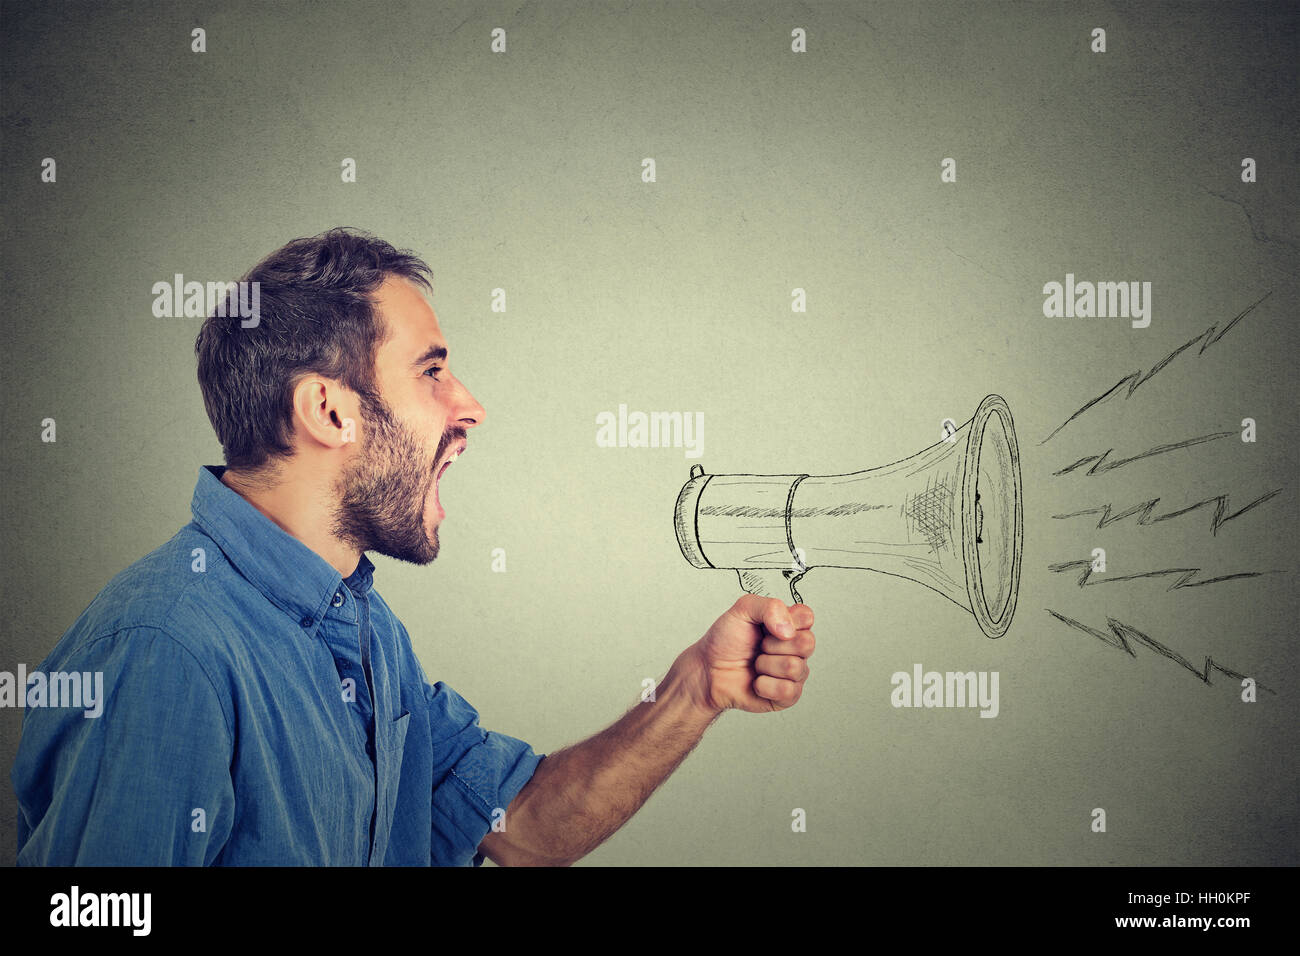 Portrait angry young man holding screaming in megaphone isolated on grey wall background. Negative face expression emotion feeling. Propaganda, breaki Stock Photo